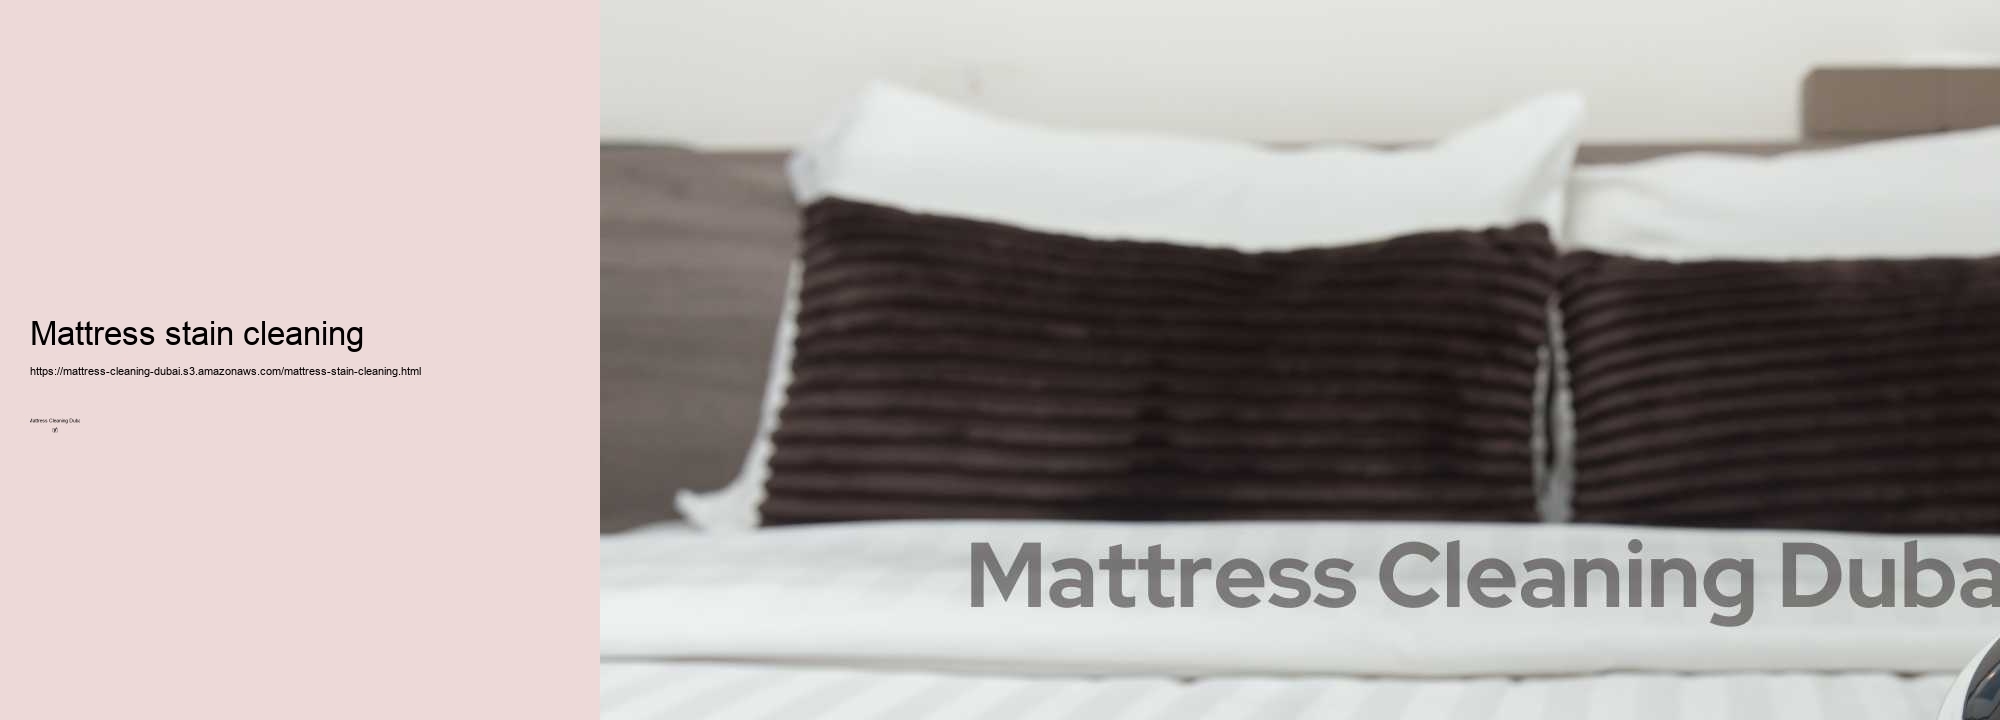 Mattress stain cleaning